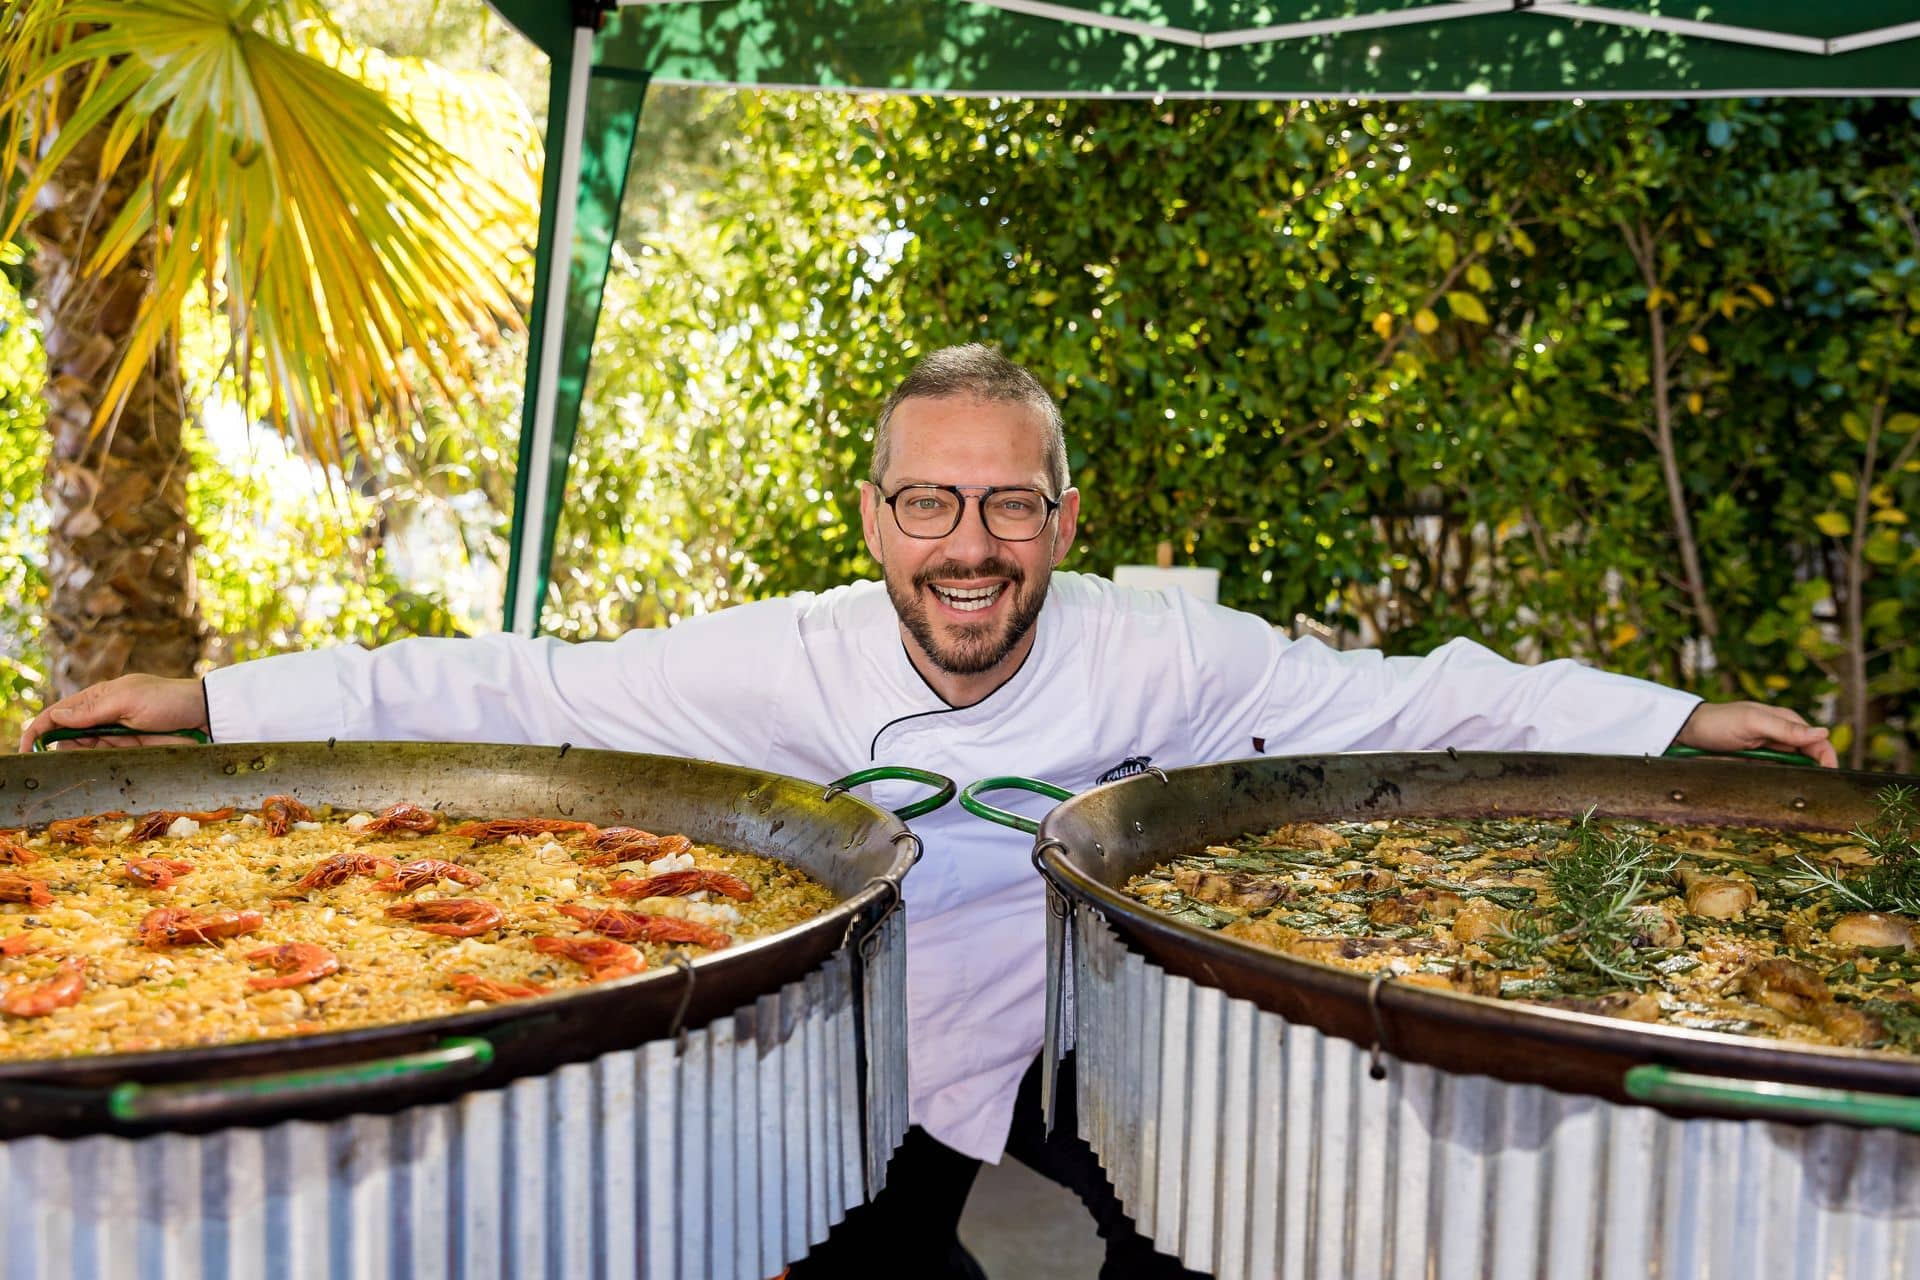 Paella, a traditional Spanish dish with a centuries-old history